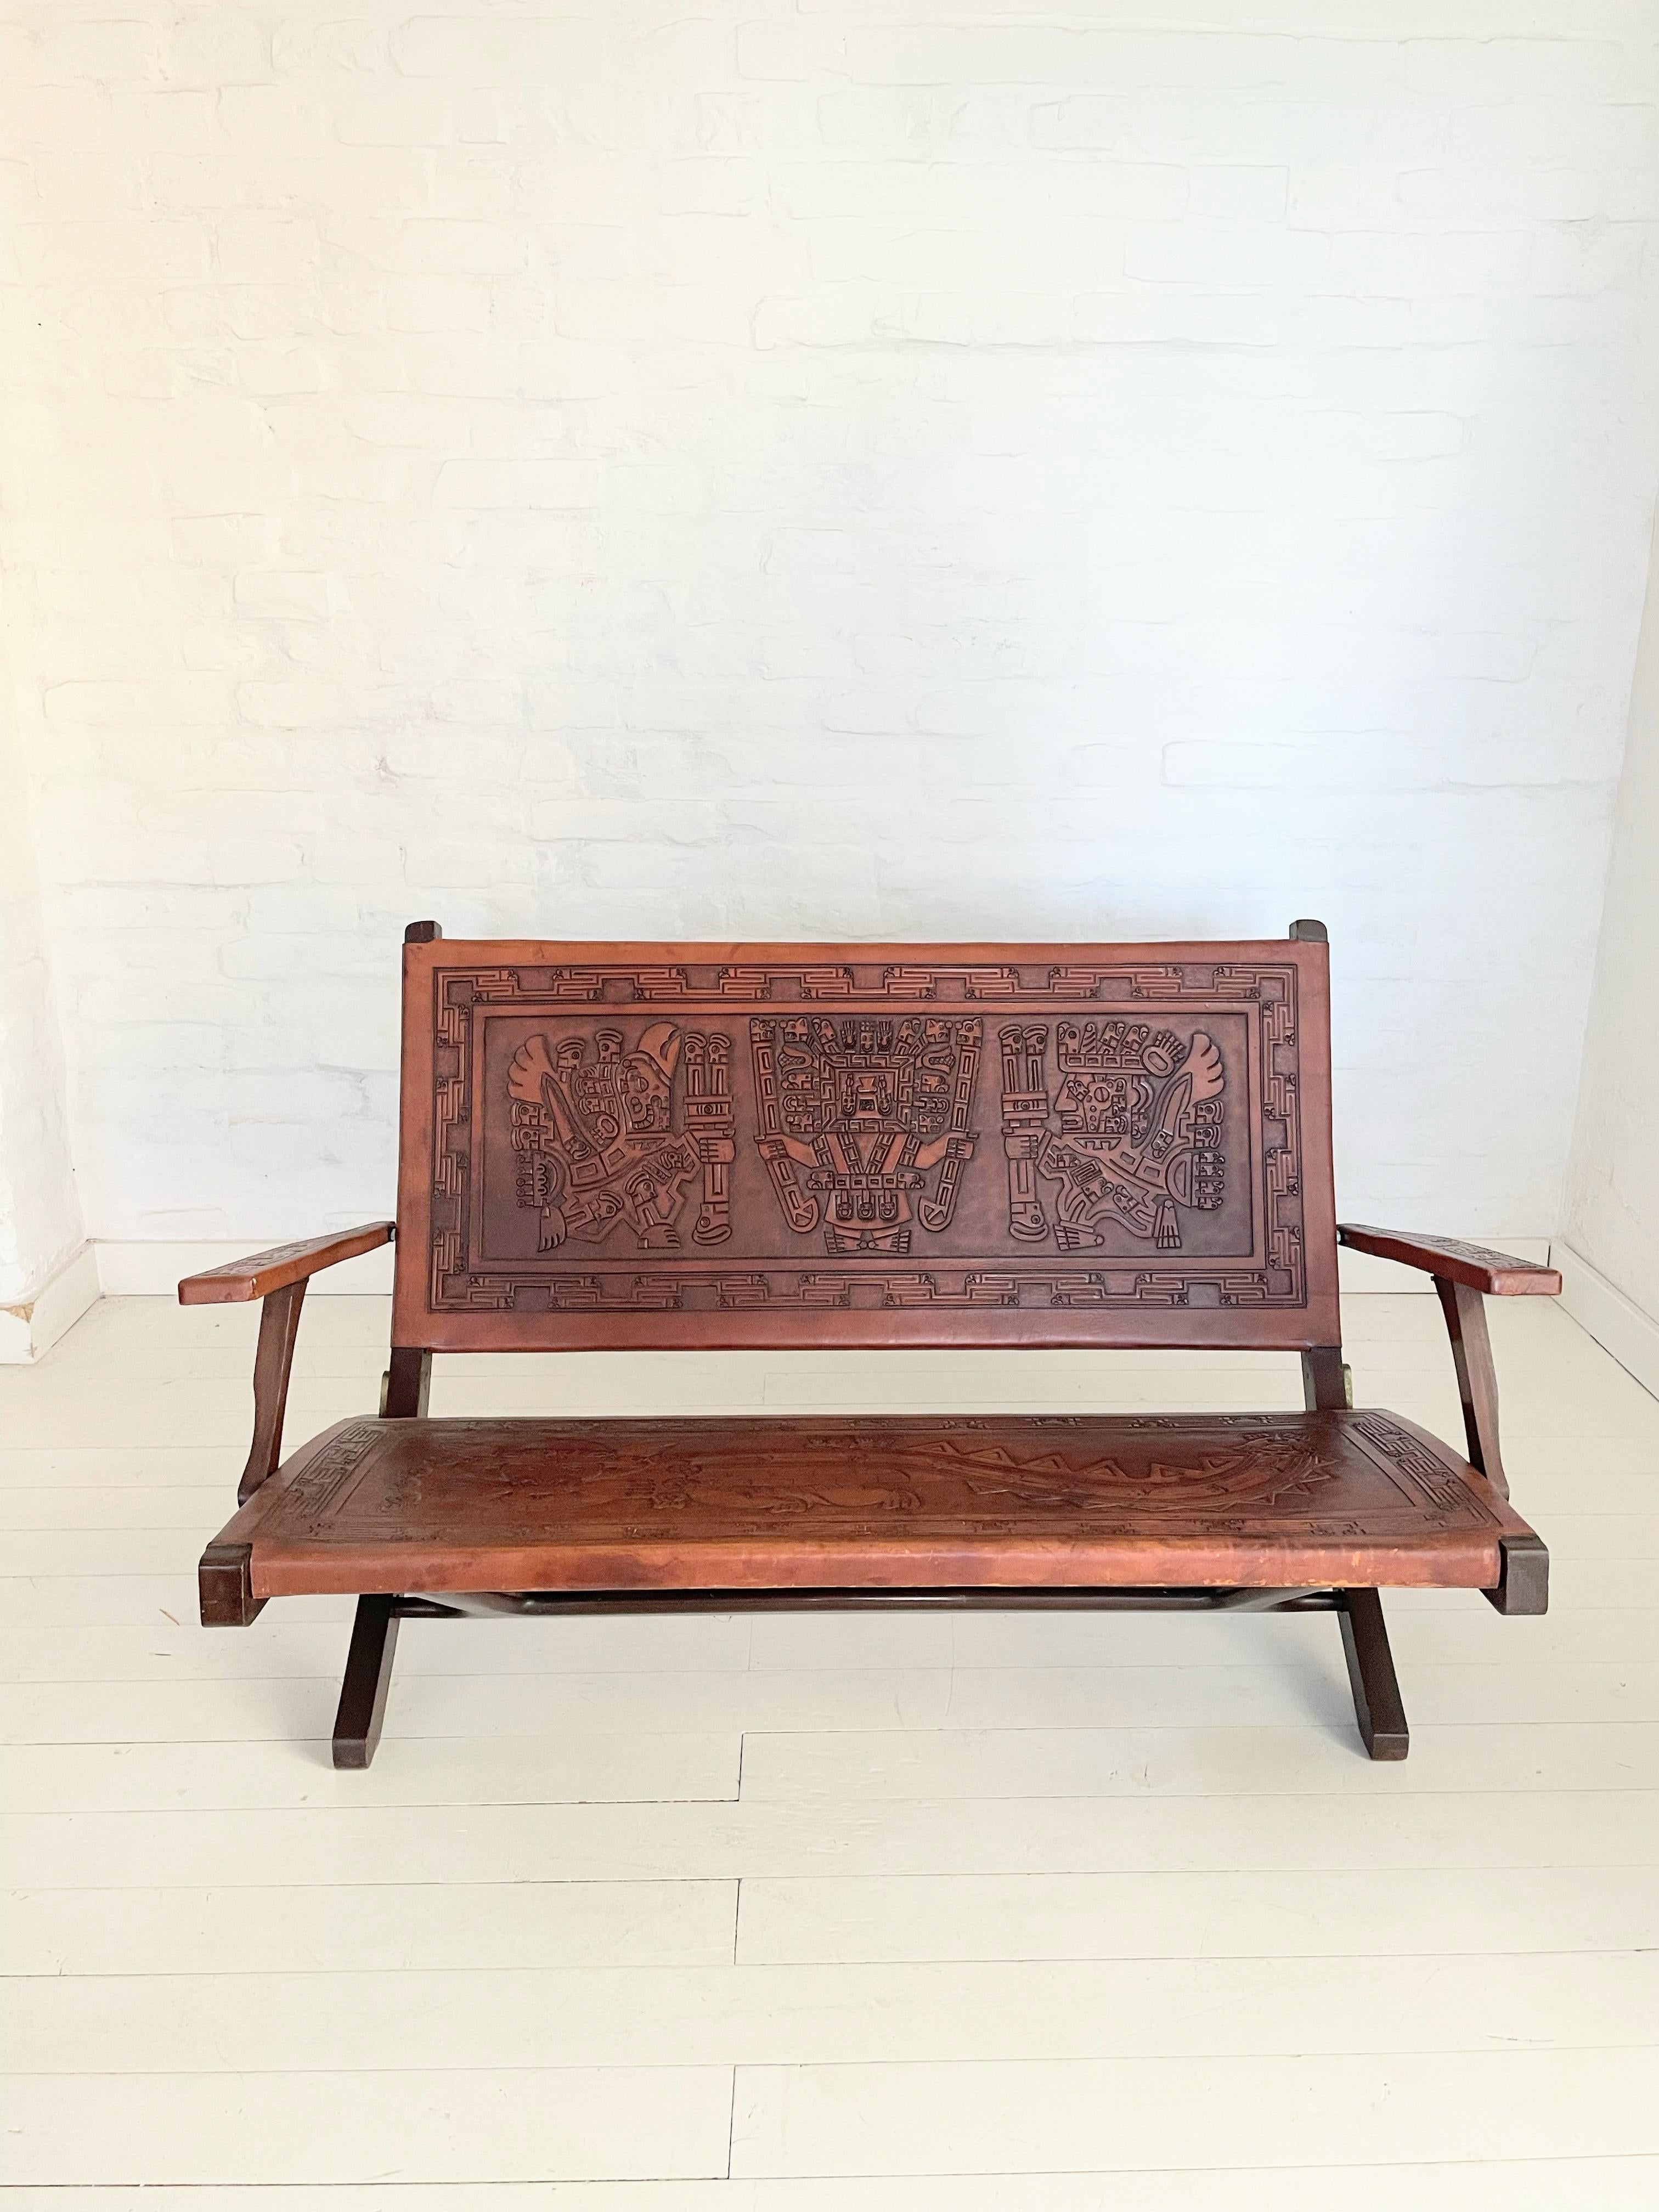 Hand-Crafted  Ecuadorian  Tooled Leather Folding Bench by Angel Pazmino 1960s